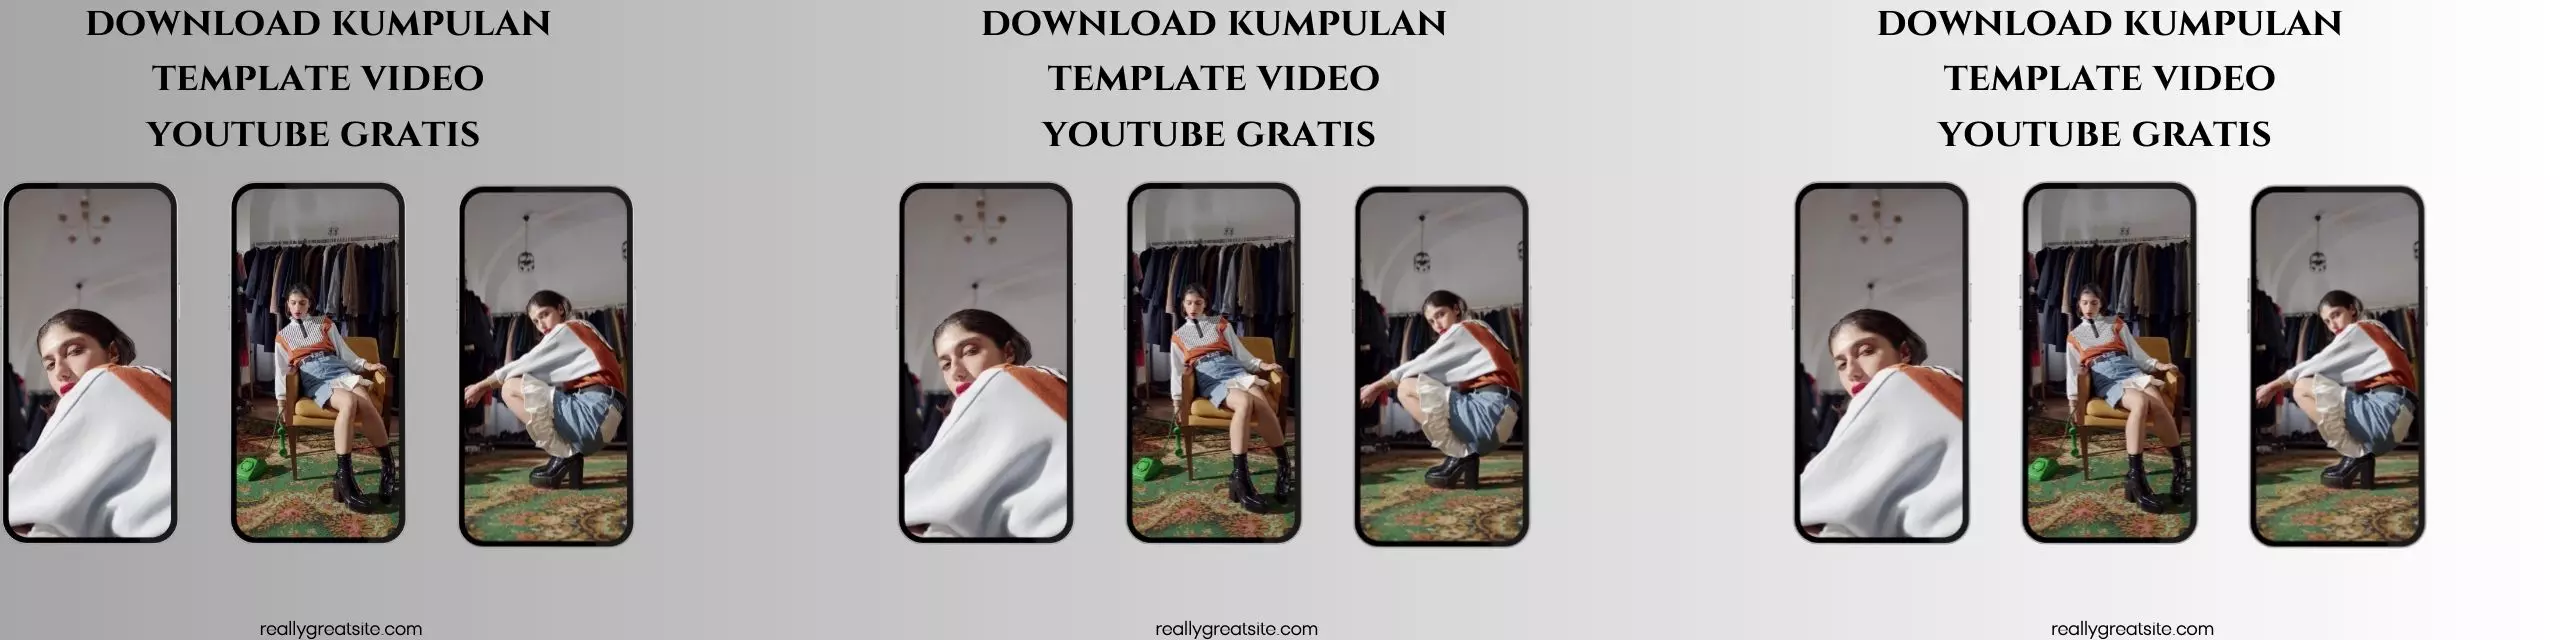 Template Video Youtube